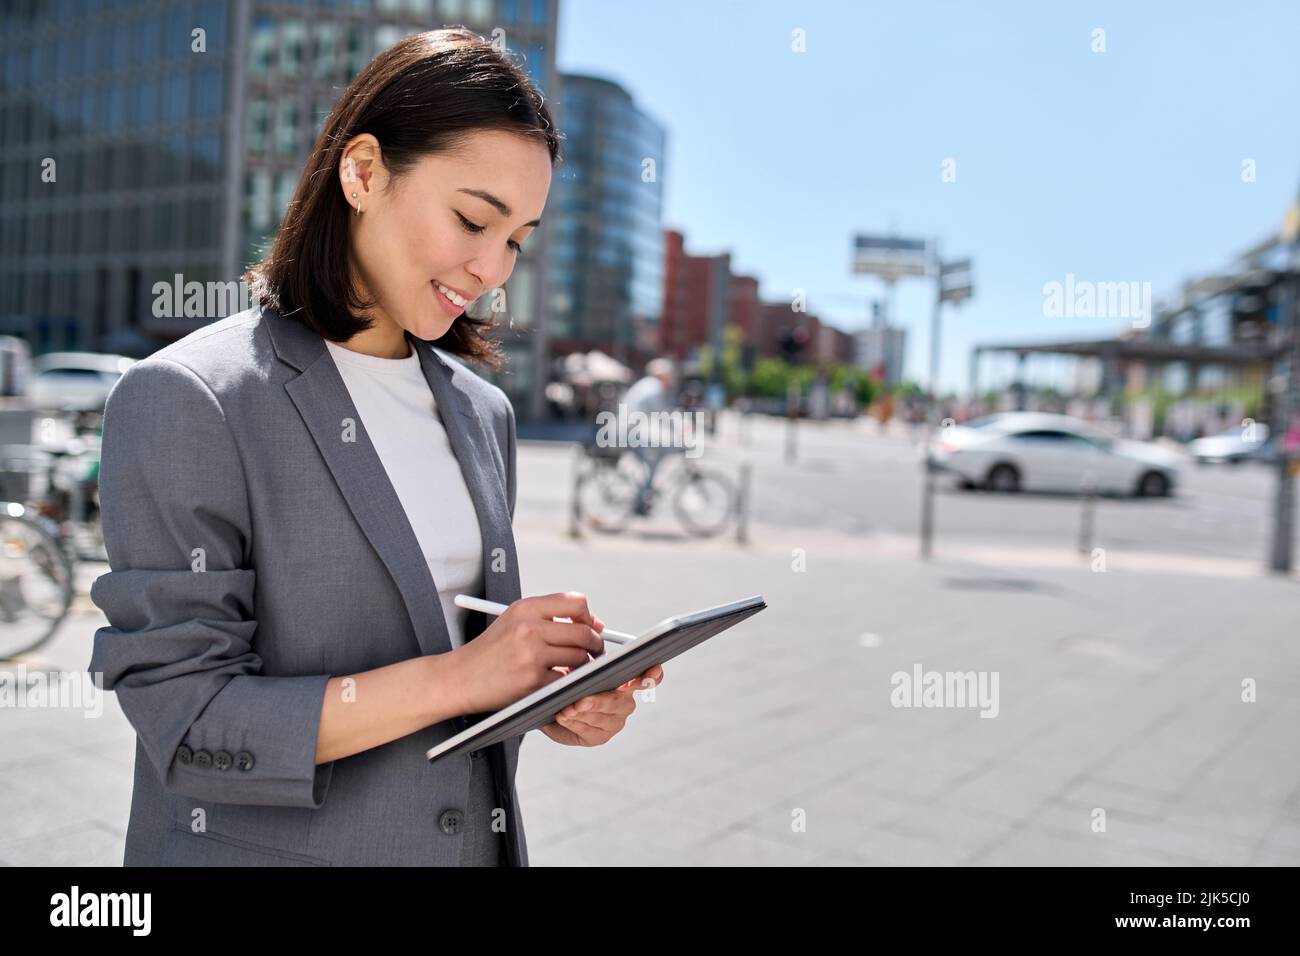 Young happy Asian business woman executive using digital tablet on city street. Stock Photo